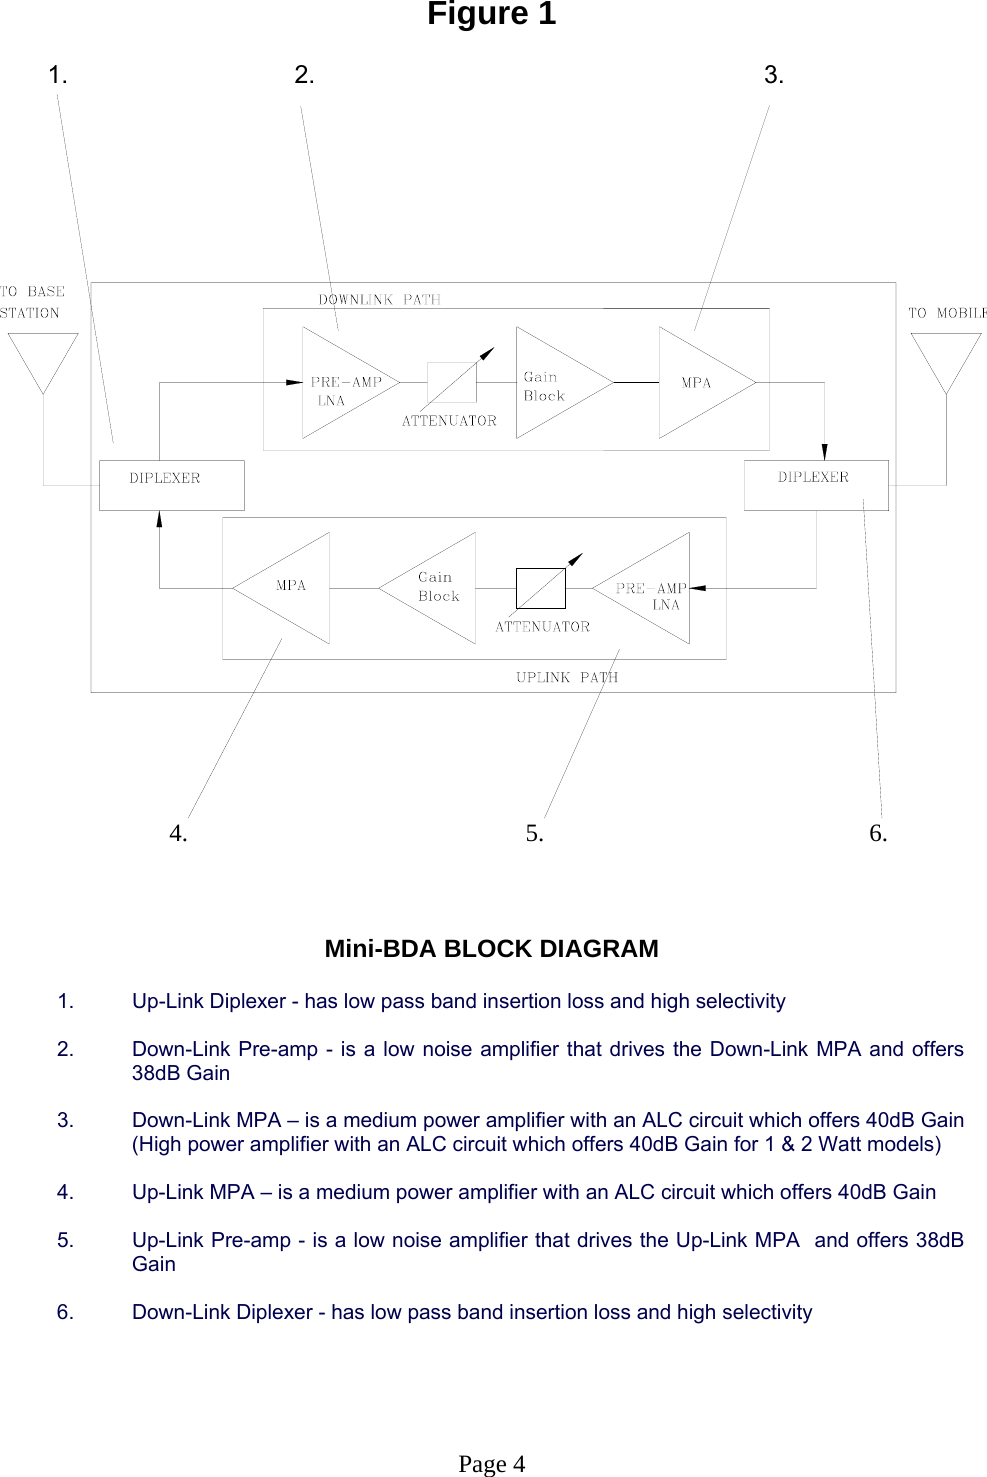 Figure 1       1.                           2.                     3.                                                                               4.                              5.                                6.    Mini-BDA BLOCK DIAGRAM  1.  Up-Link Diplexer - has low pass band insertion loss and high selectivity   2.  Down-Link Pre-amp - is a low noise amplifier that drives the Down-Link MPA and offers 38dB Gain  3.  Down-Link MPA – is a medium power amplifier with an ALC circuit which offers 40dB Gain (High power amplifier with an ALC circuit which offers 40dB Gain for 1 &amp; 2 Watt models)   4.  Up-Link MPA – is a medium power amplifier with an ALC circuit which offers 40dB Gain   5.  Up-Link Pre-amp - is a low noise amplifier that drives the Up-Link MPA  and offers 38dB Gain  6.  Down-Link Diplexer - has low pass band insertion loss and high selectivity     Page 4 